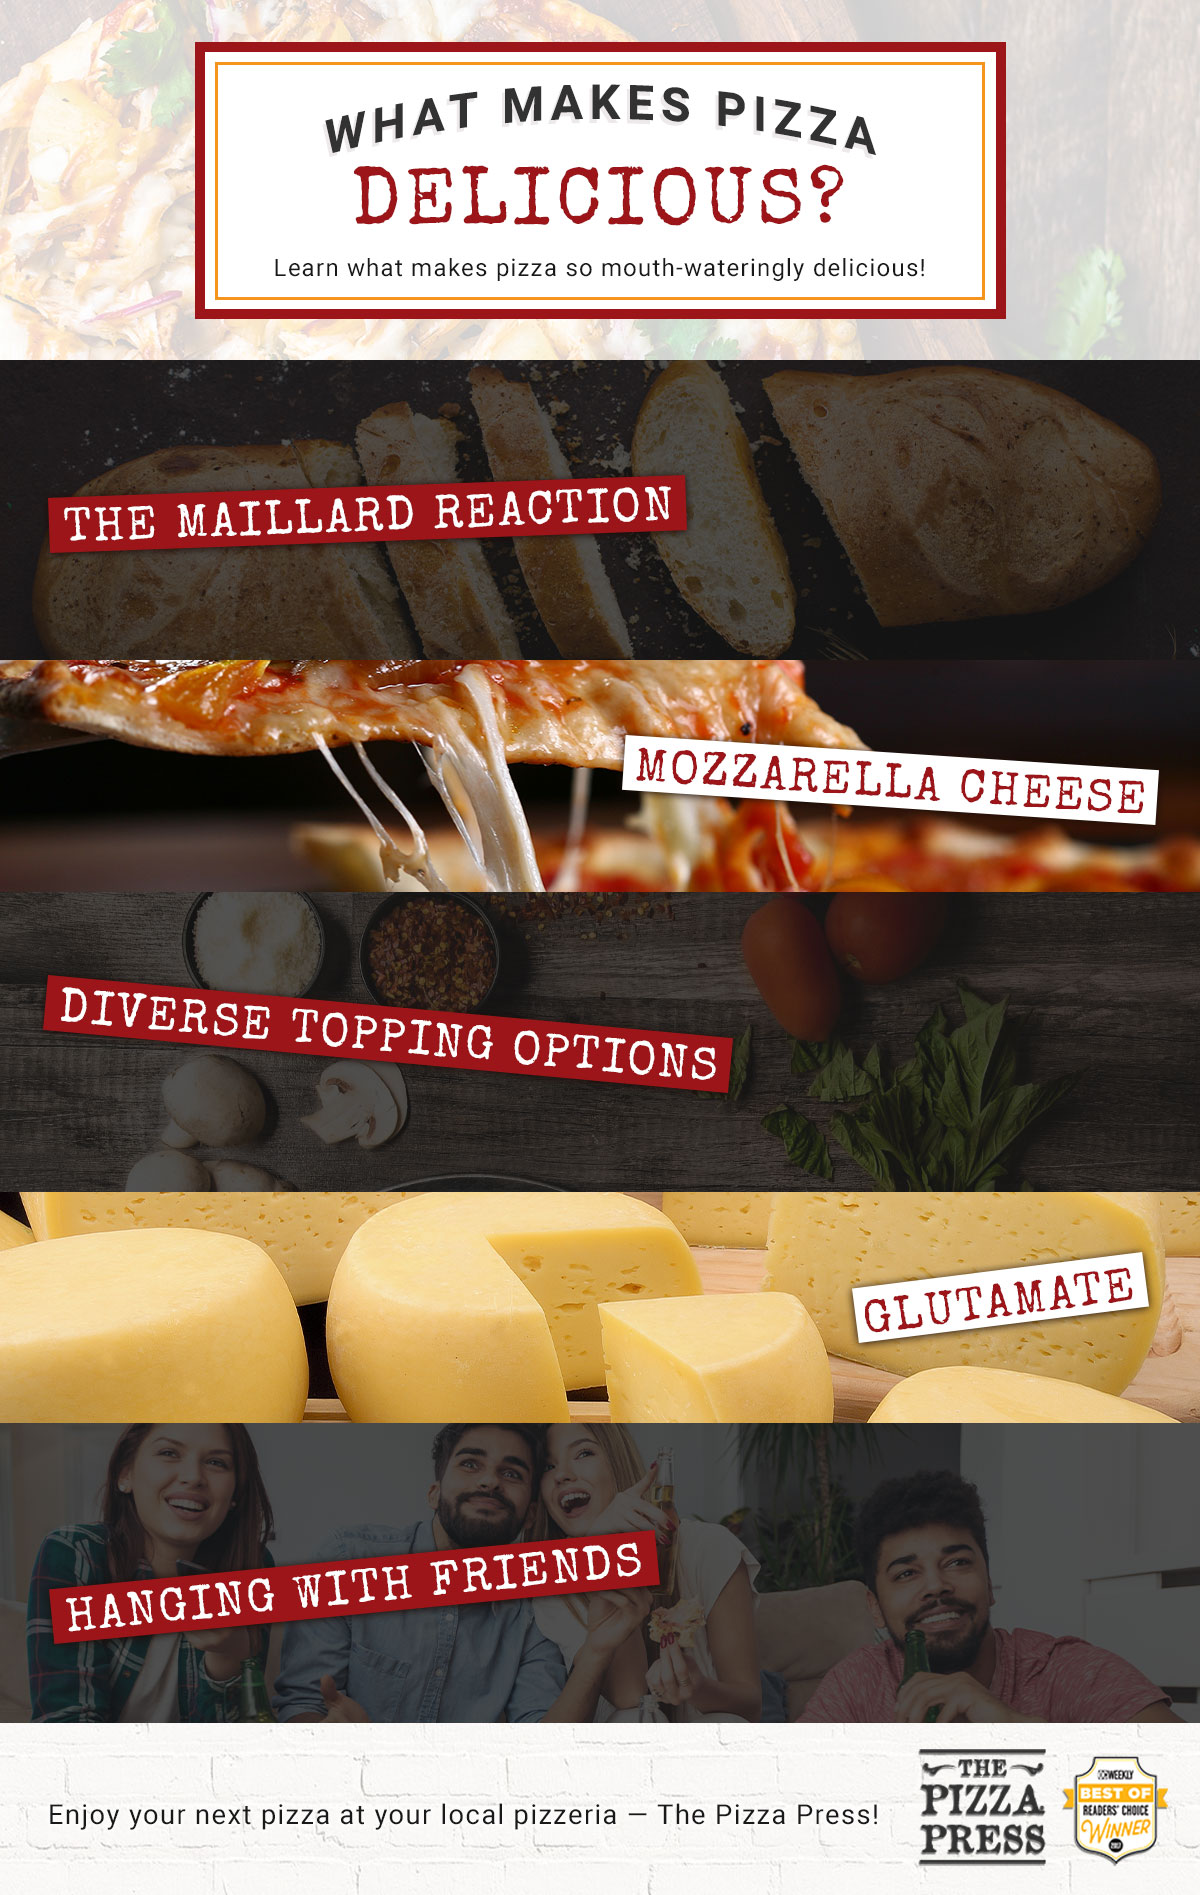 What Makes Pizza Delicious infographic